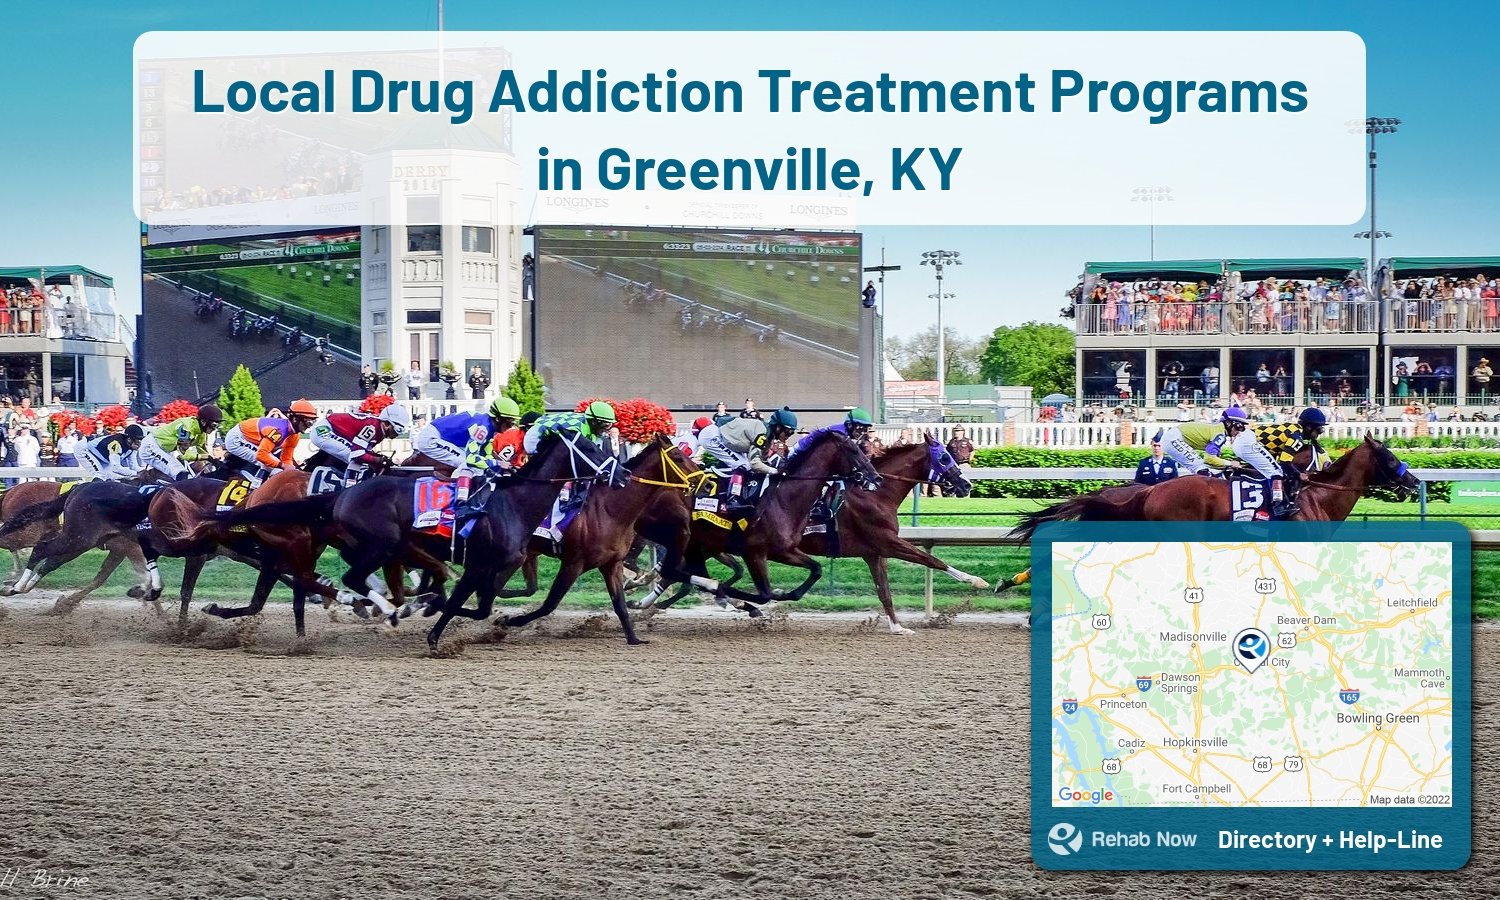 Greenville, KY Treatment Centers. Find drug rehab in Greenville, Kentucky, or detox and treatment programs. Get the right help now!